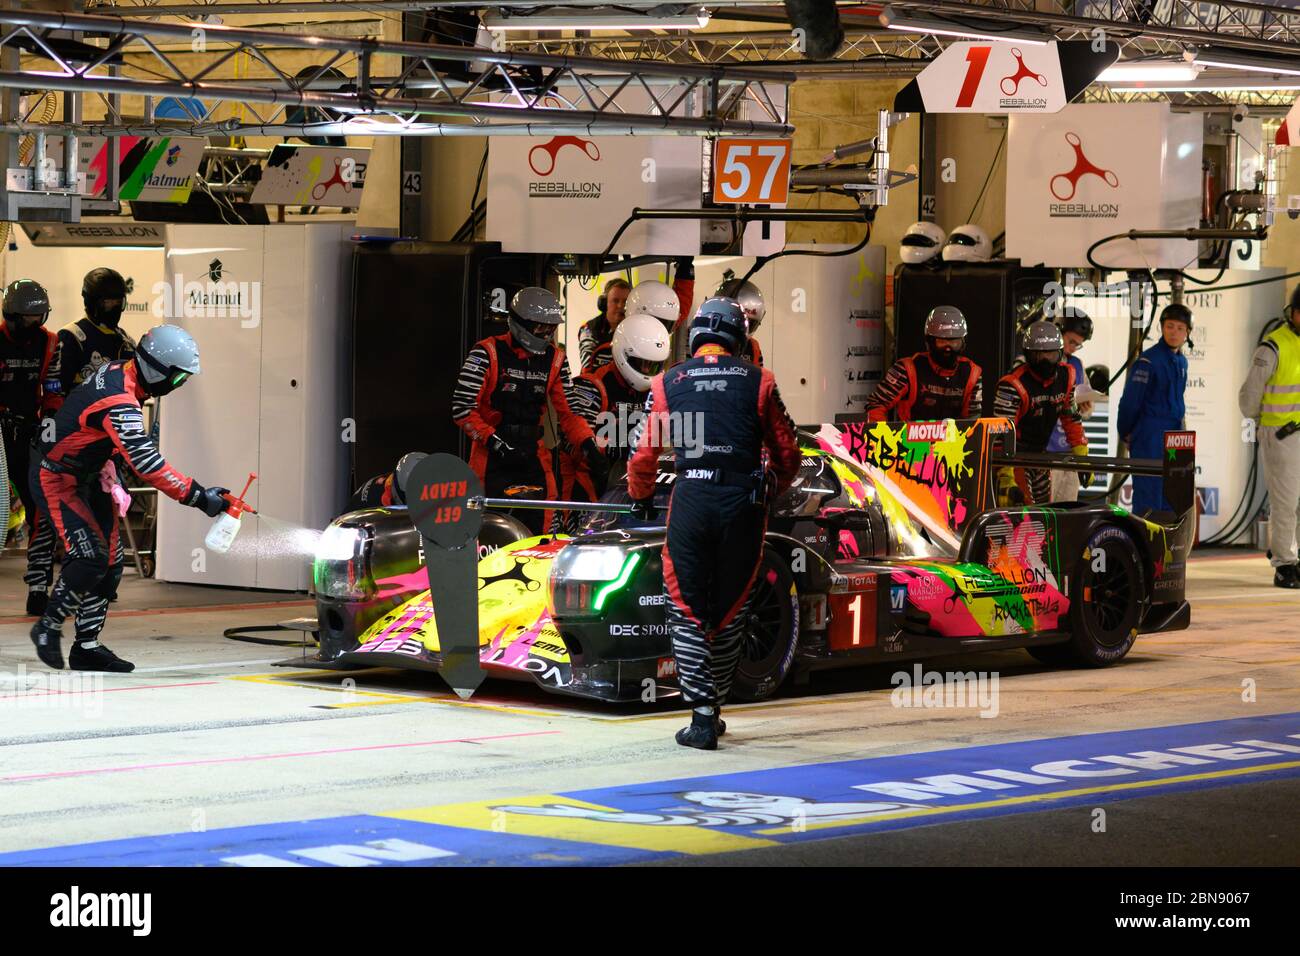 Le Mans / France - June 15-16 2019: 24 hours of Le Mans, Rebellion Racing Team , Rebellion R13 LMP1 In the stands for maintenance operations, Race of Stock Photo